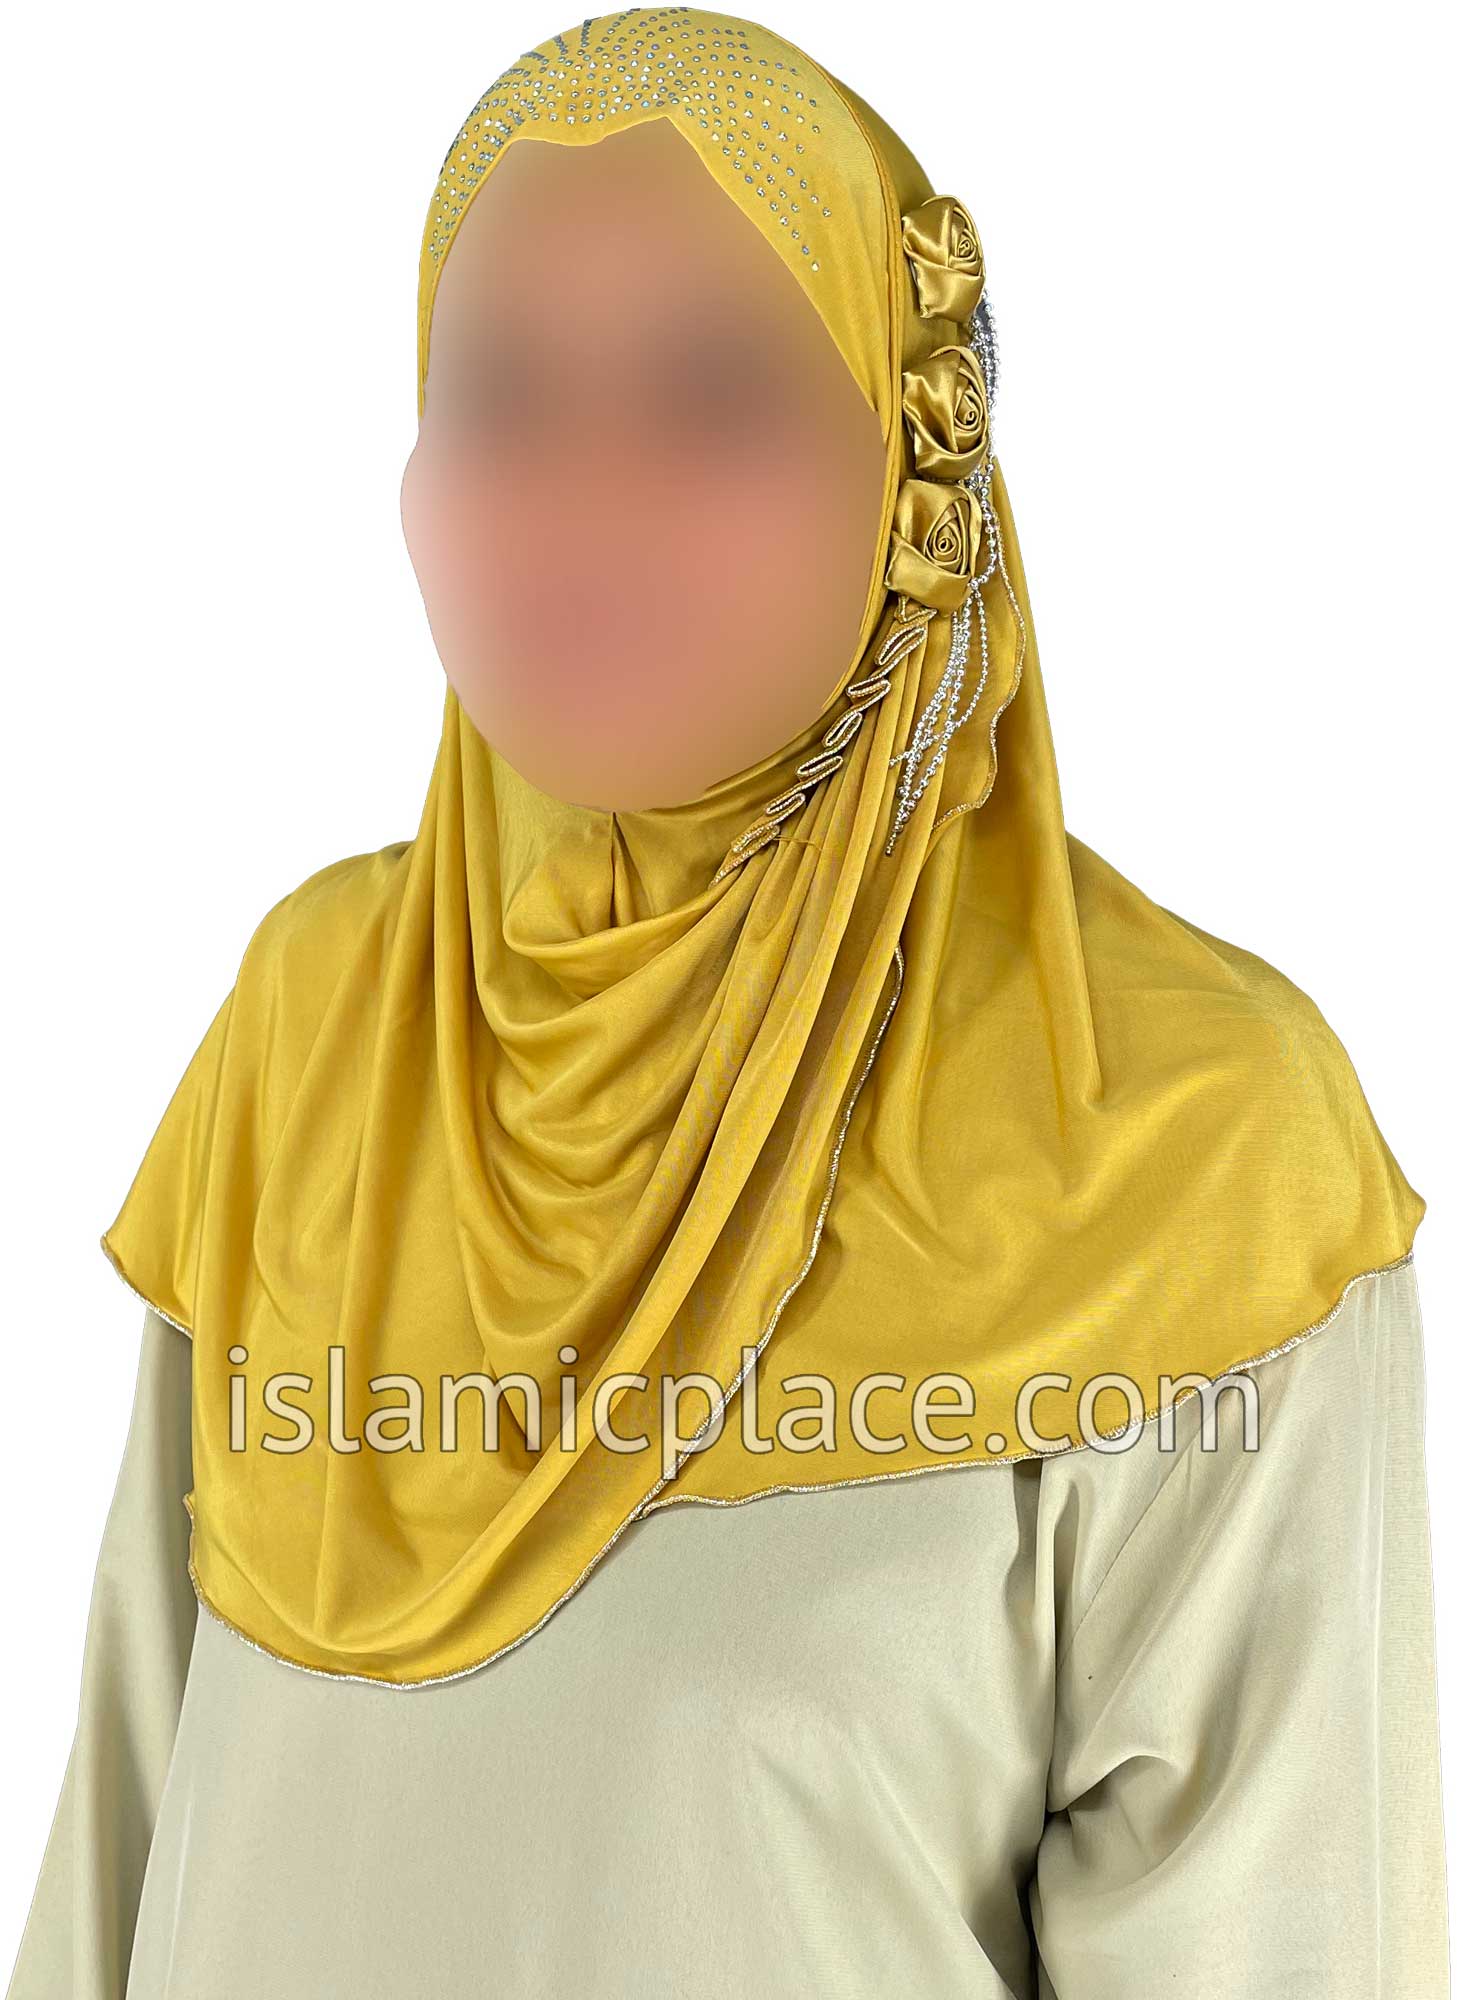 Gold - Roses in a Row Teen to Adult (Large) Hijab Al-Amira (1-piece style) - Design 11